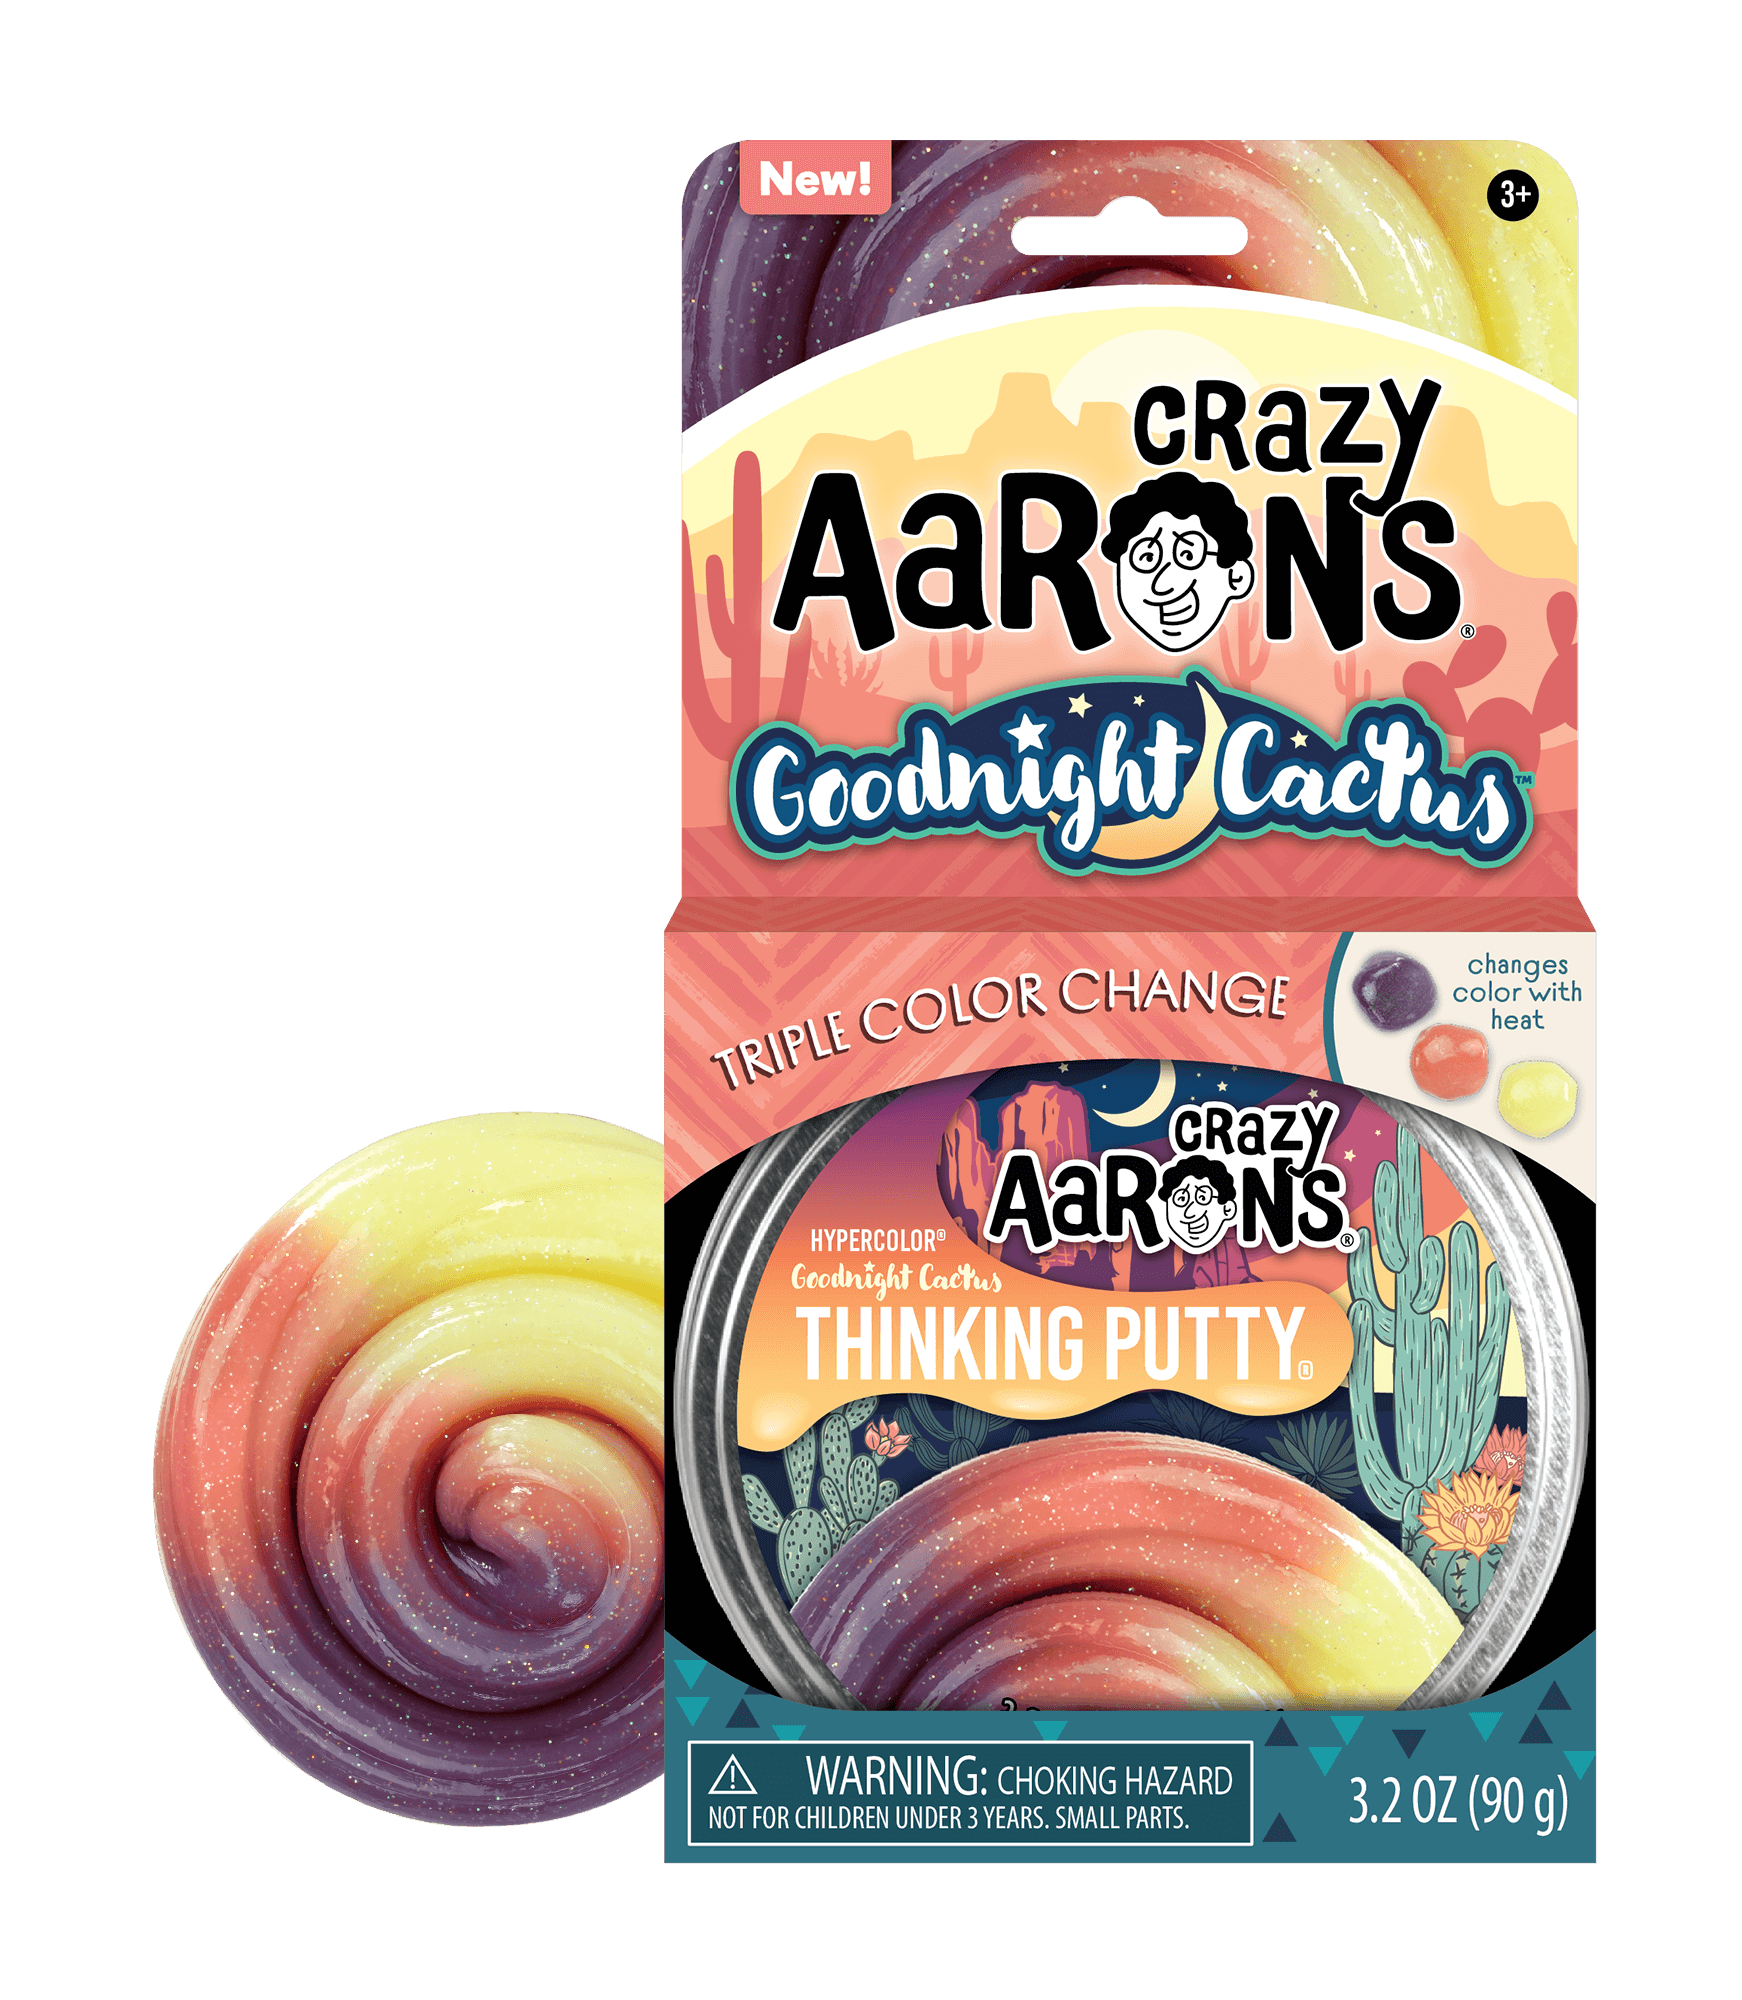 Crazy Aarons Thinking Putty – Goodnight Cactus